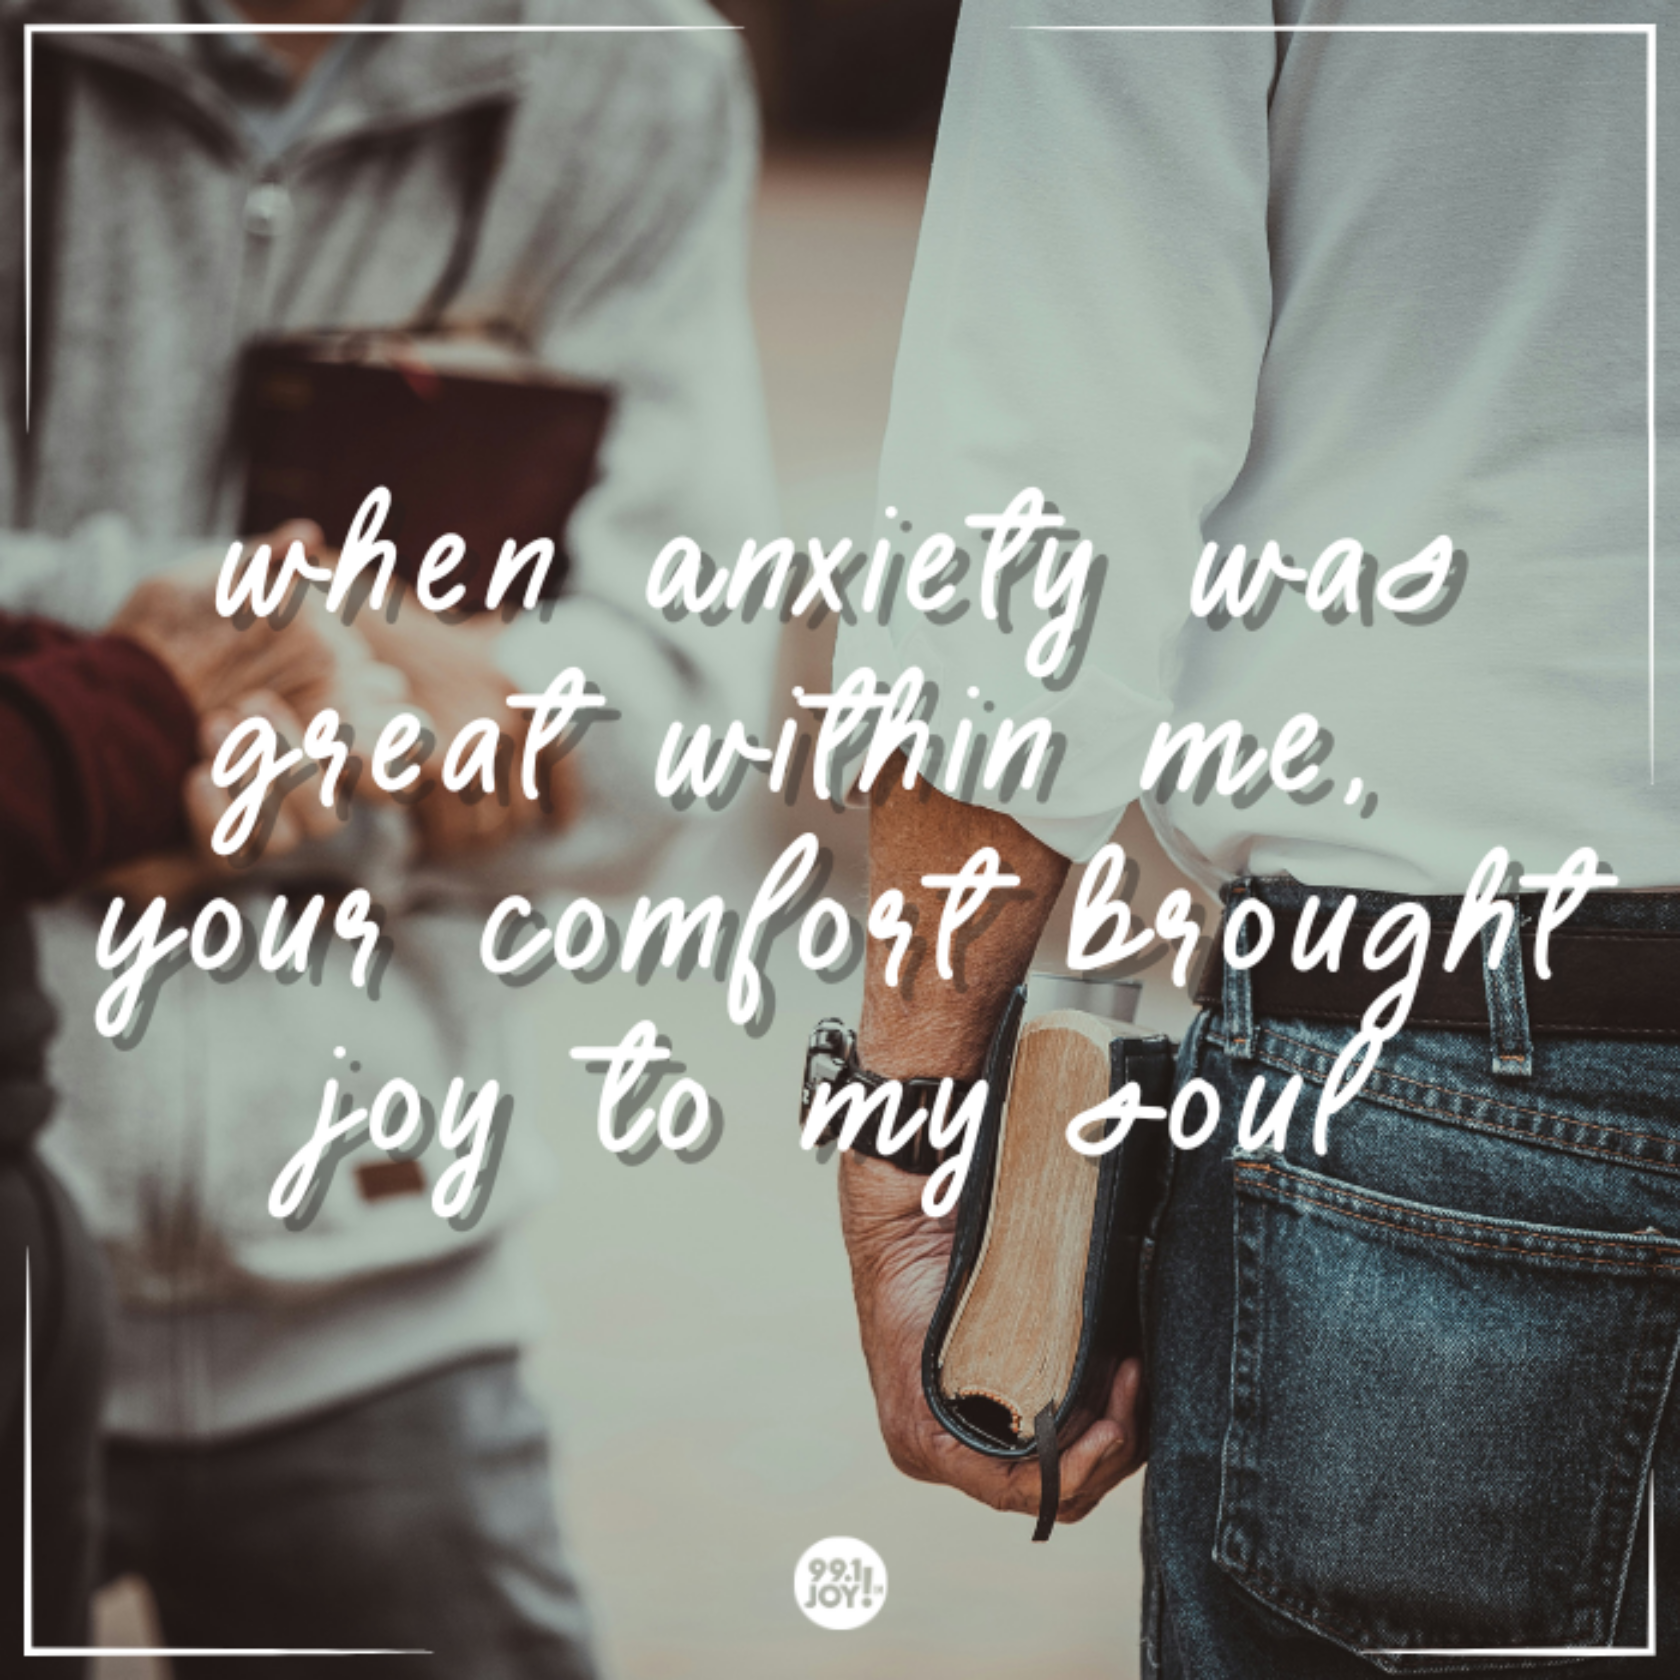 When Anxiety Was Great Within Me, Your Comfort Brought Joy To My Soul